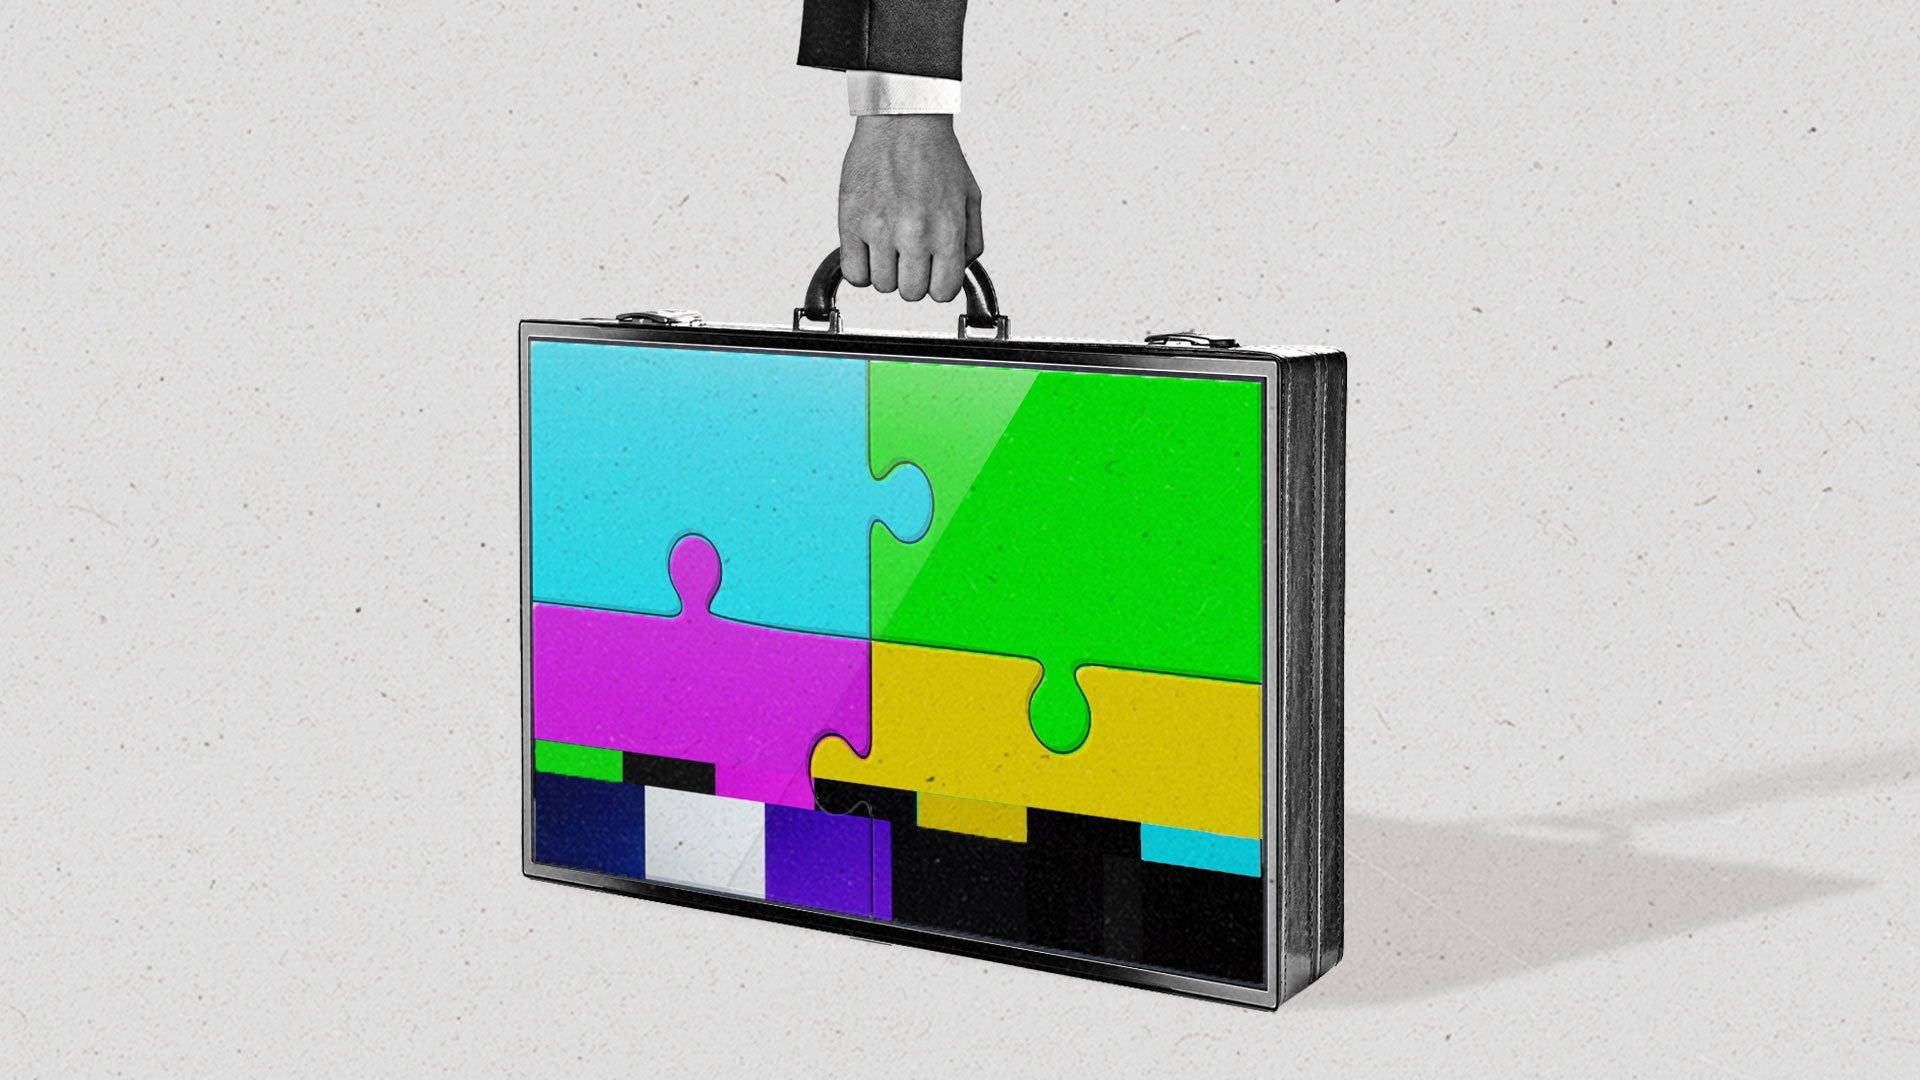 A man lifts the handle on a briefcase made from a connected TV, which shows a puzzle piece test pattern on the screen.